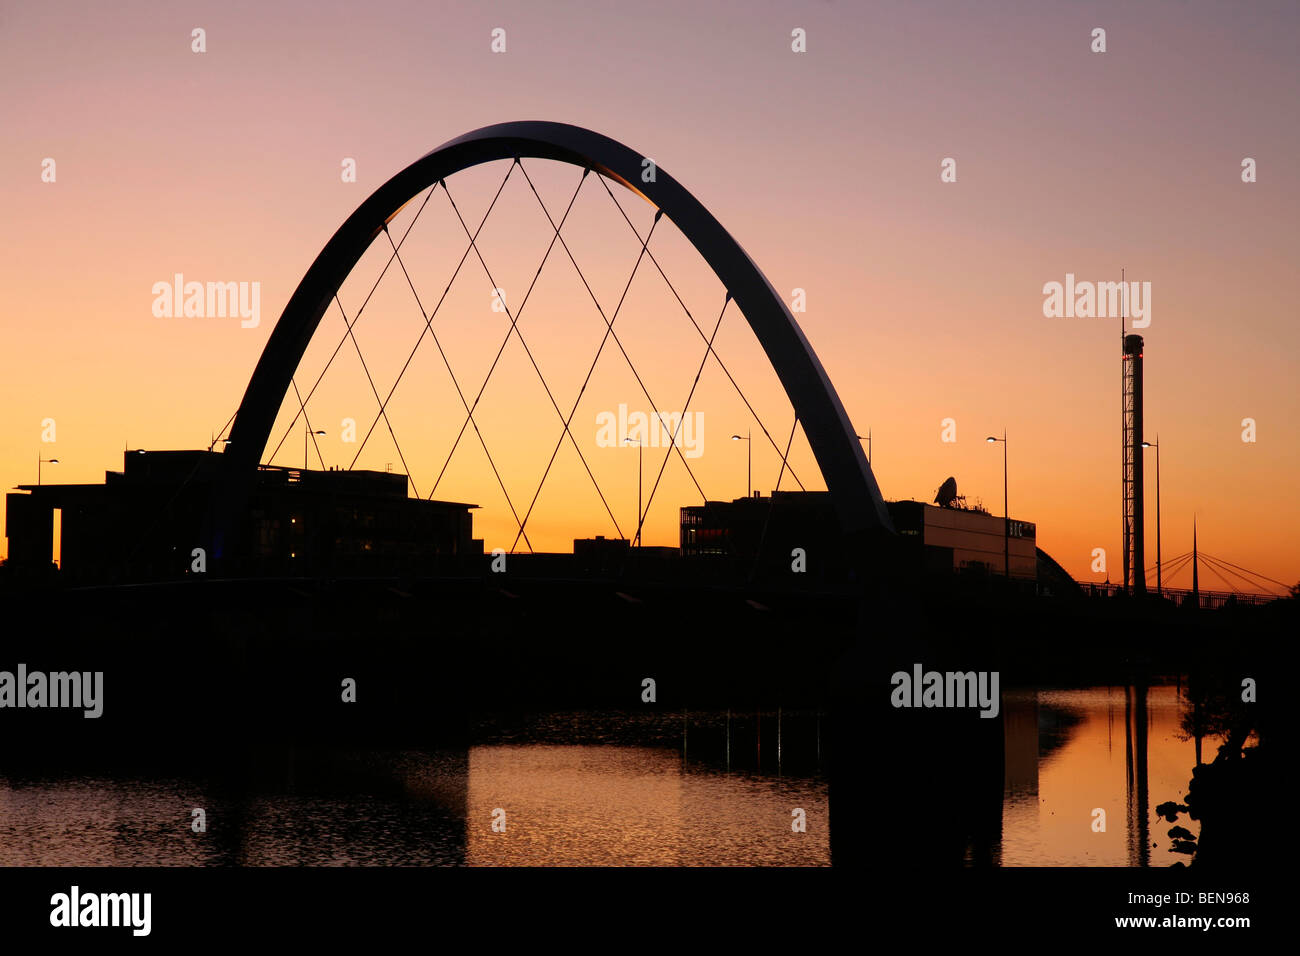 The Glasgow Clyde Arc Bridge at sunset. Stock Photo